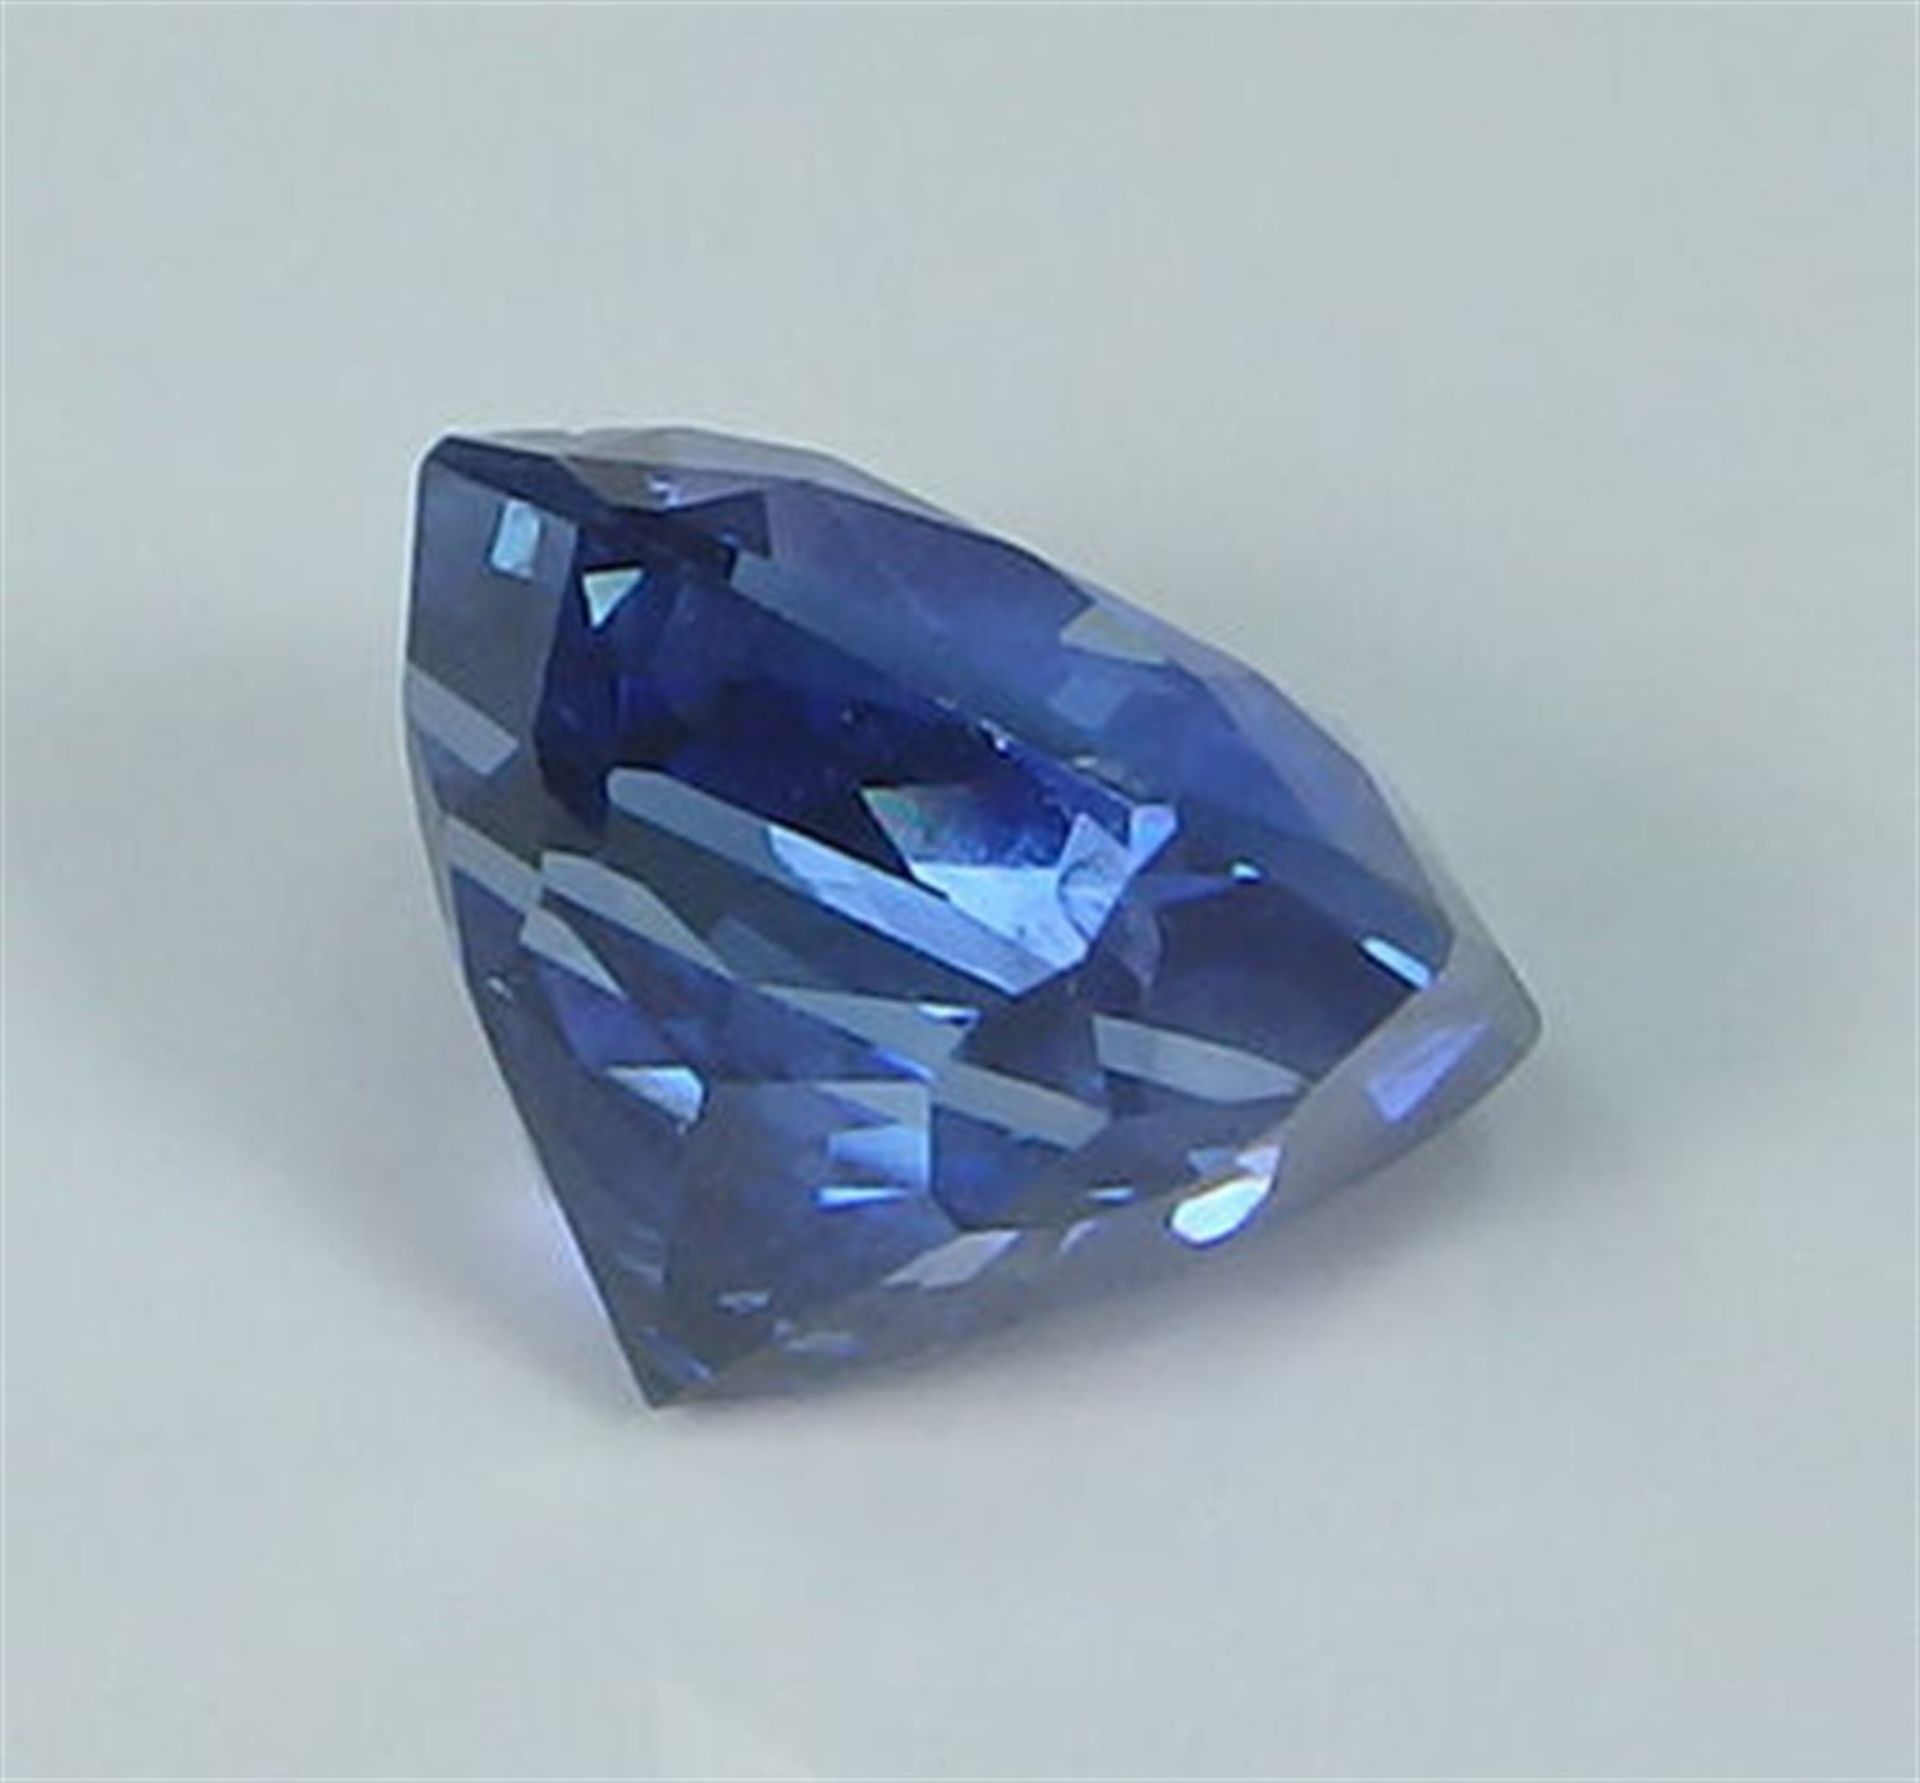 GIA Certified 3.51 ct. Untreated Blue Sapphire - BURMA - Image 4 of 7